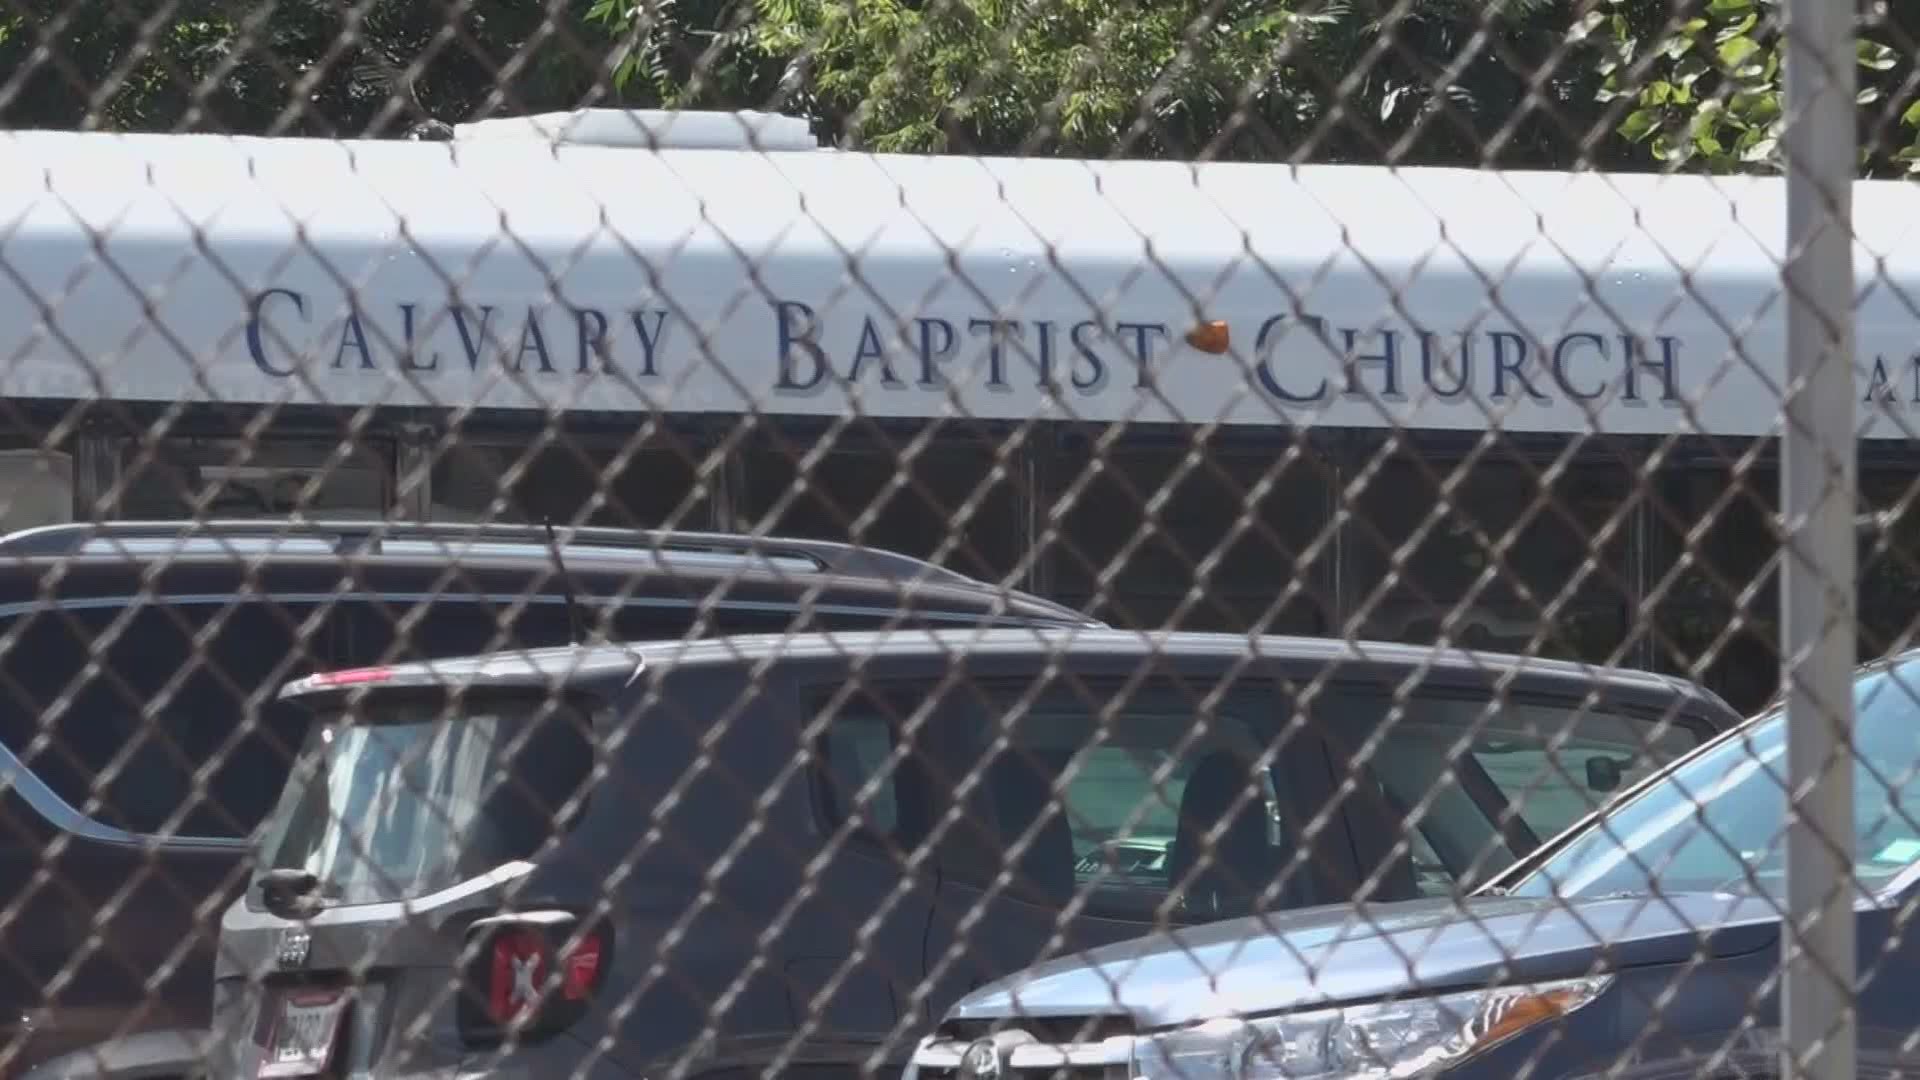 Cavalry Baptist Church in Sanford is the most recent site of a Covid-19 outbreak connected to an August wedding in Millinocket.